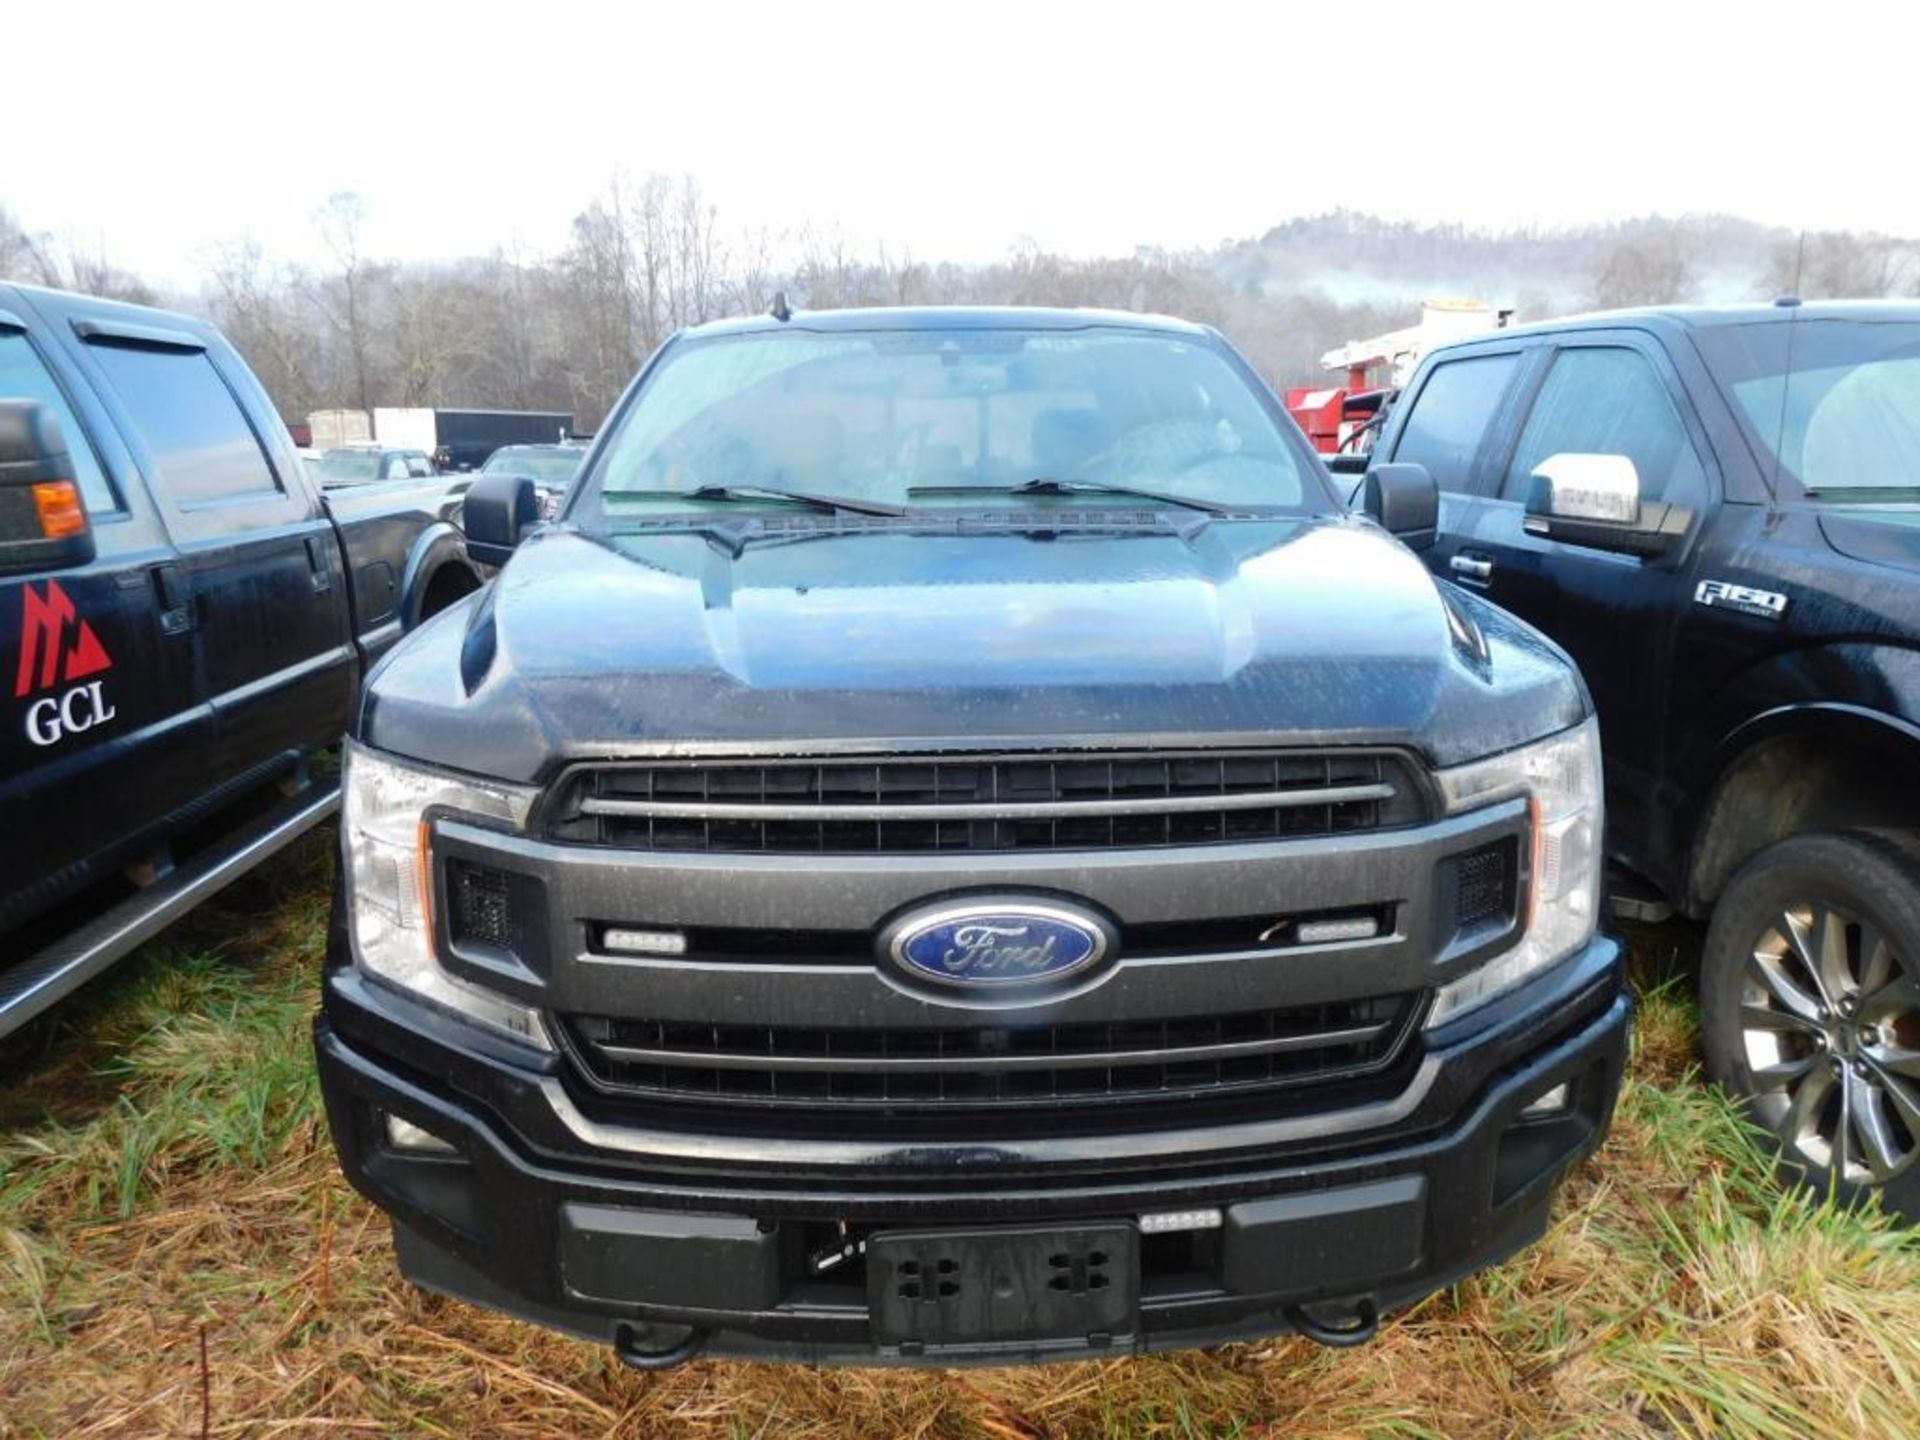 2019 Ford F150 XLT Crew Cab, 4-Wheel Drive, 3.5 Liter Ecoboost Gasoline Motor, Auto, 5'6" Bed Sport - Image 3 of 10